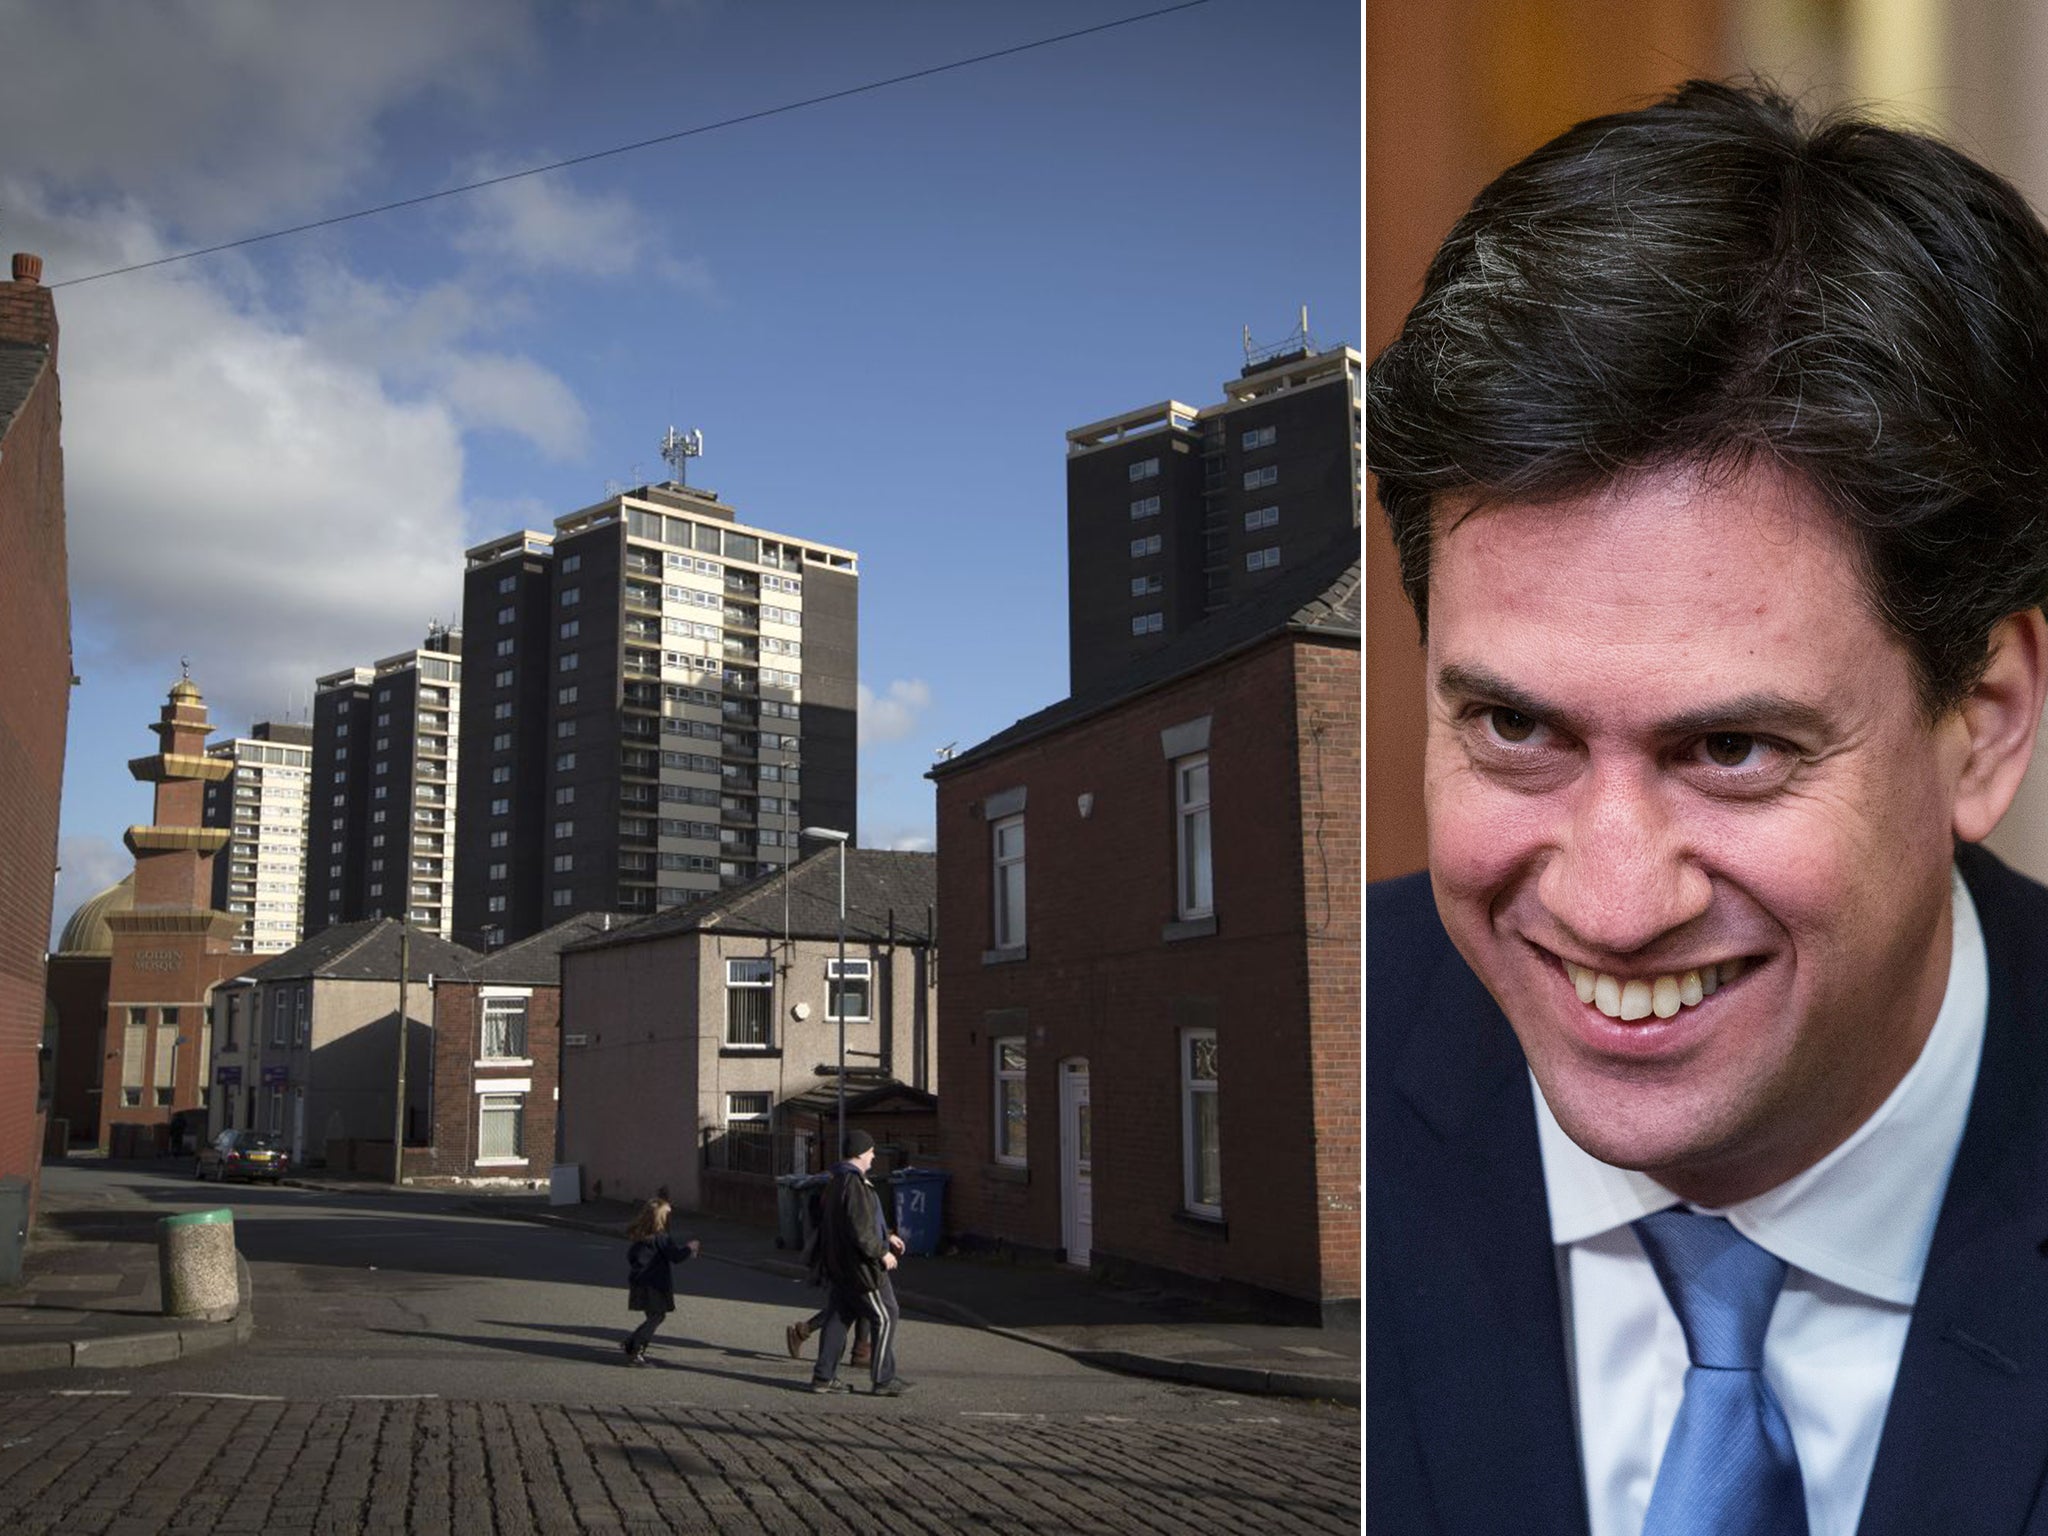 One Rochdale resident said: “Ed Miliband is
not as posh as David Cameron, but he’s very out of touch. There are a lot of poor people in Rochdale, through no fault of their own.”